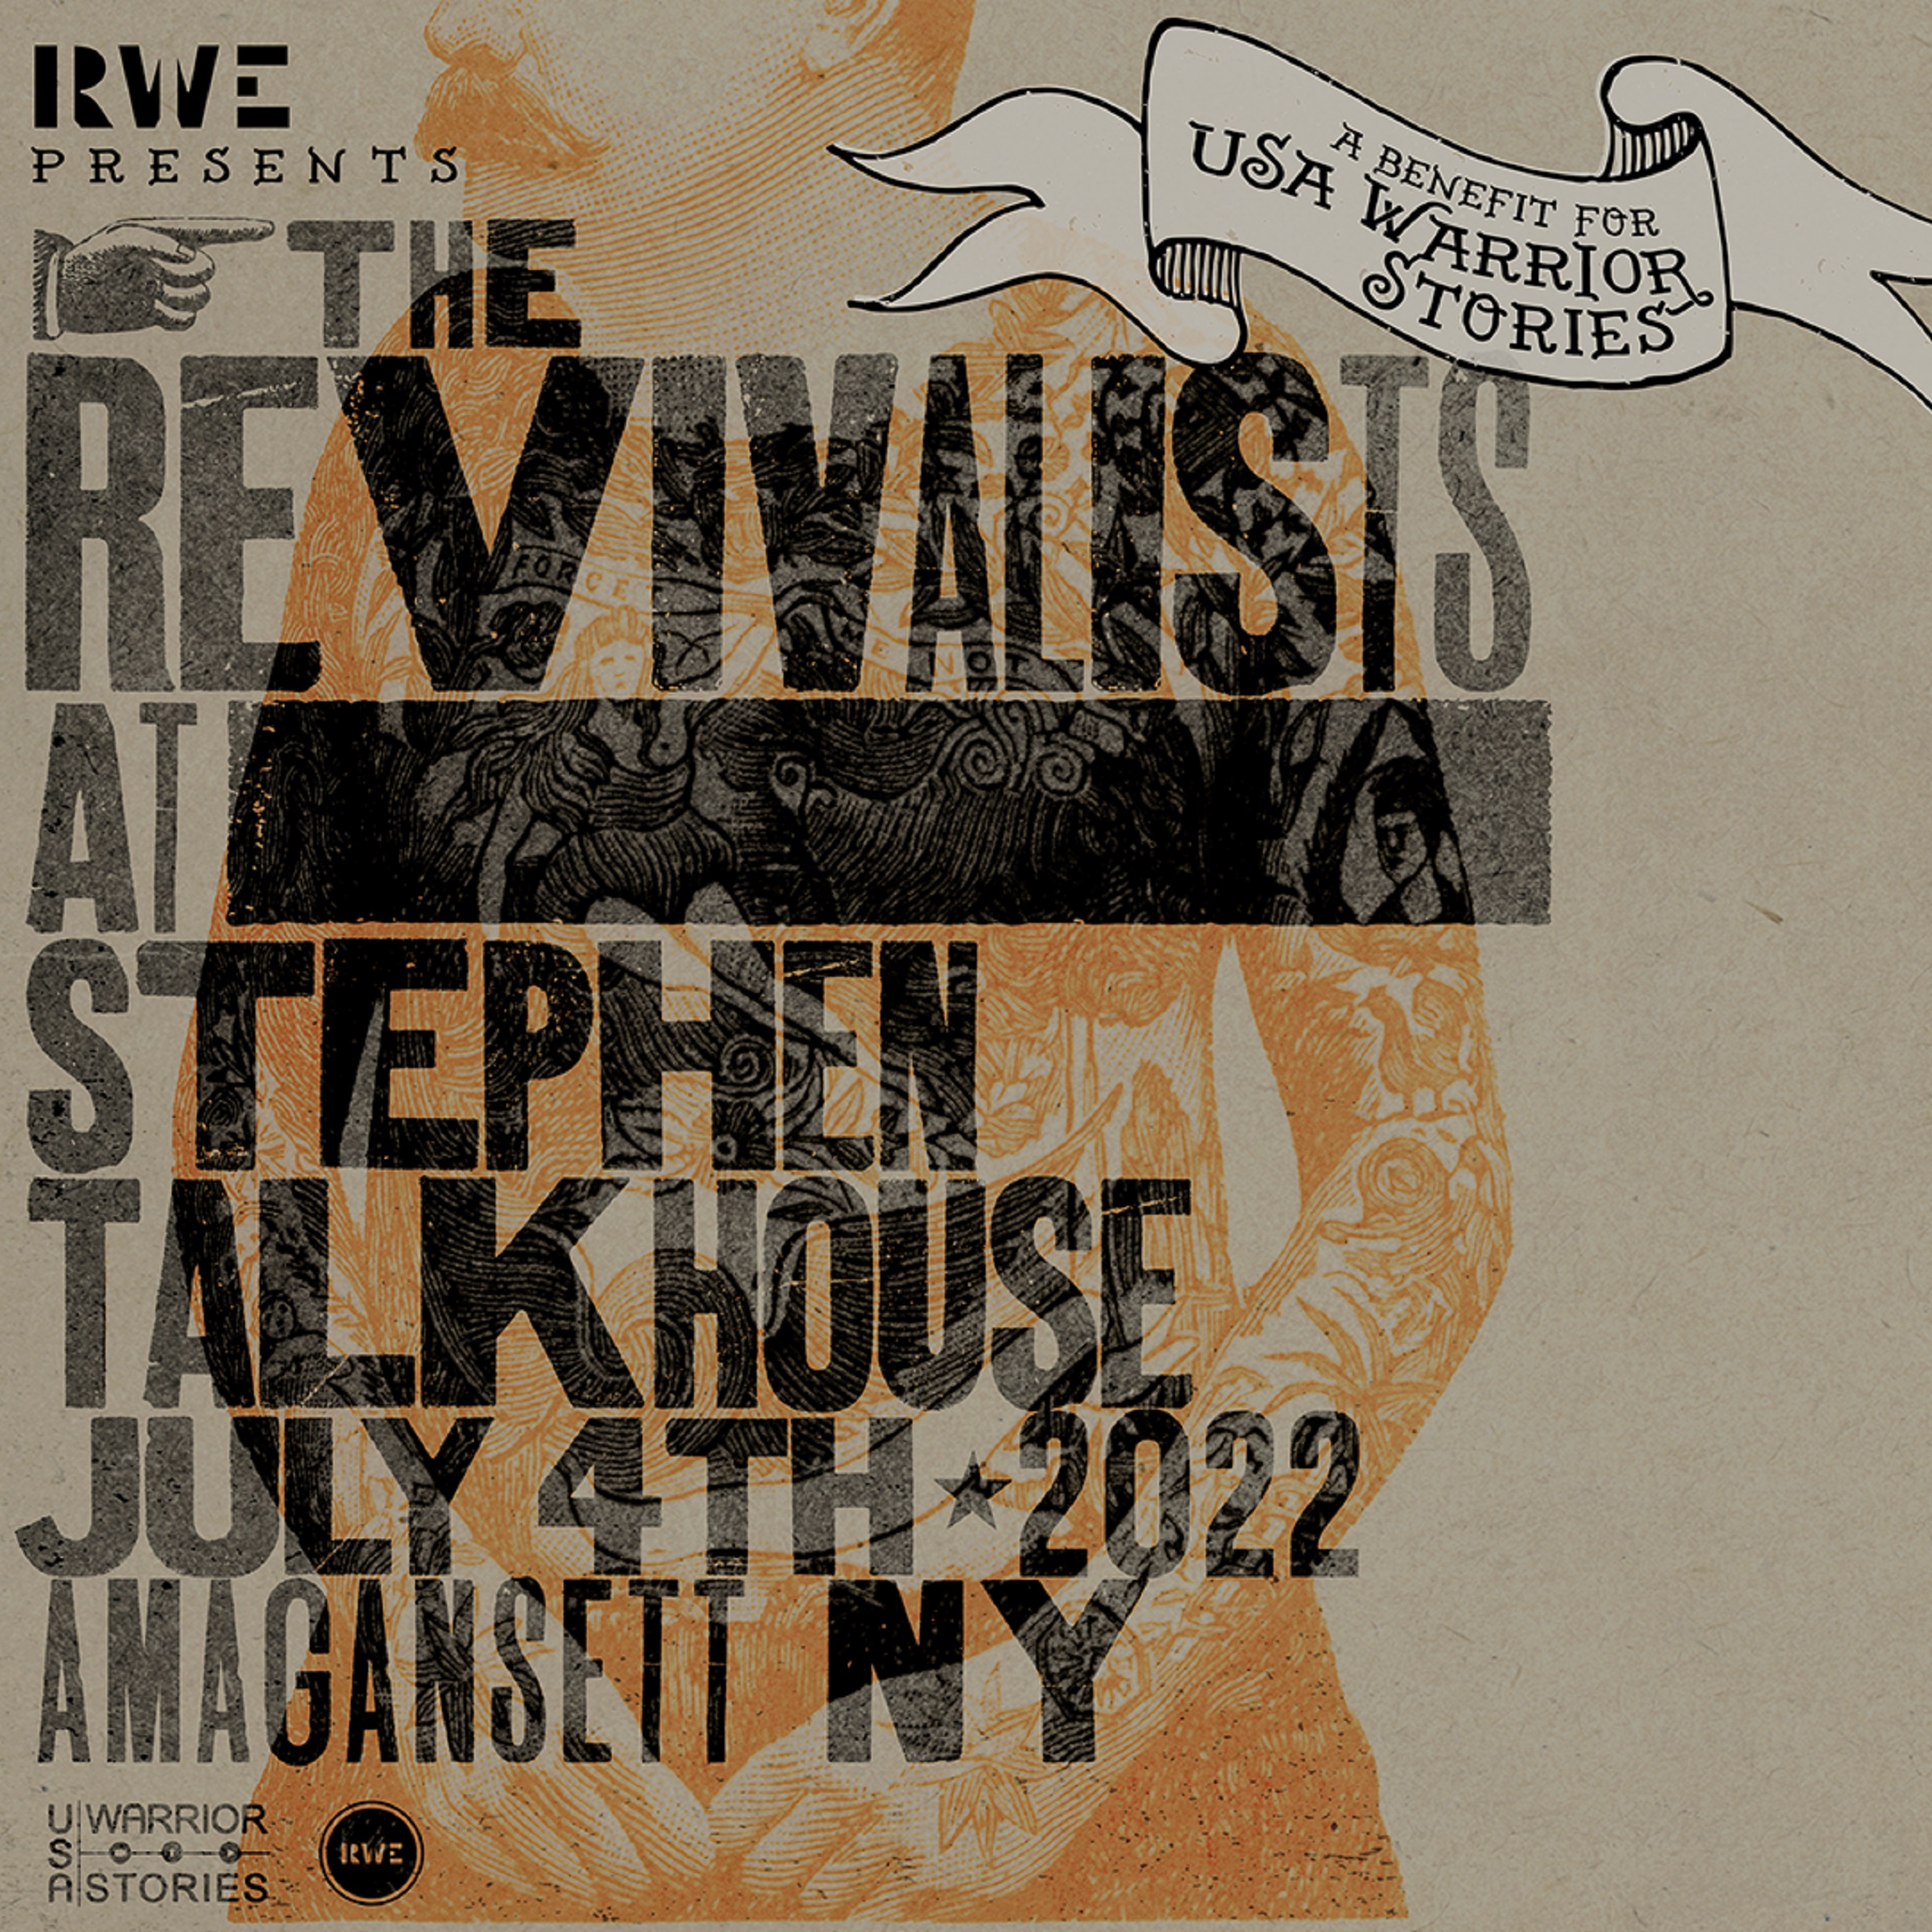 Hamptons Charity Summer Concert Series with July 4th Show Featuring The Revivalists